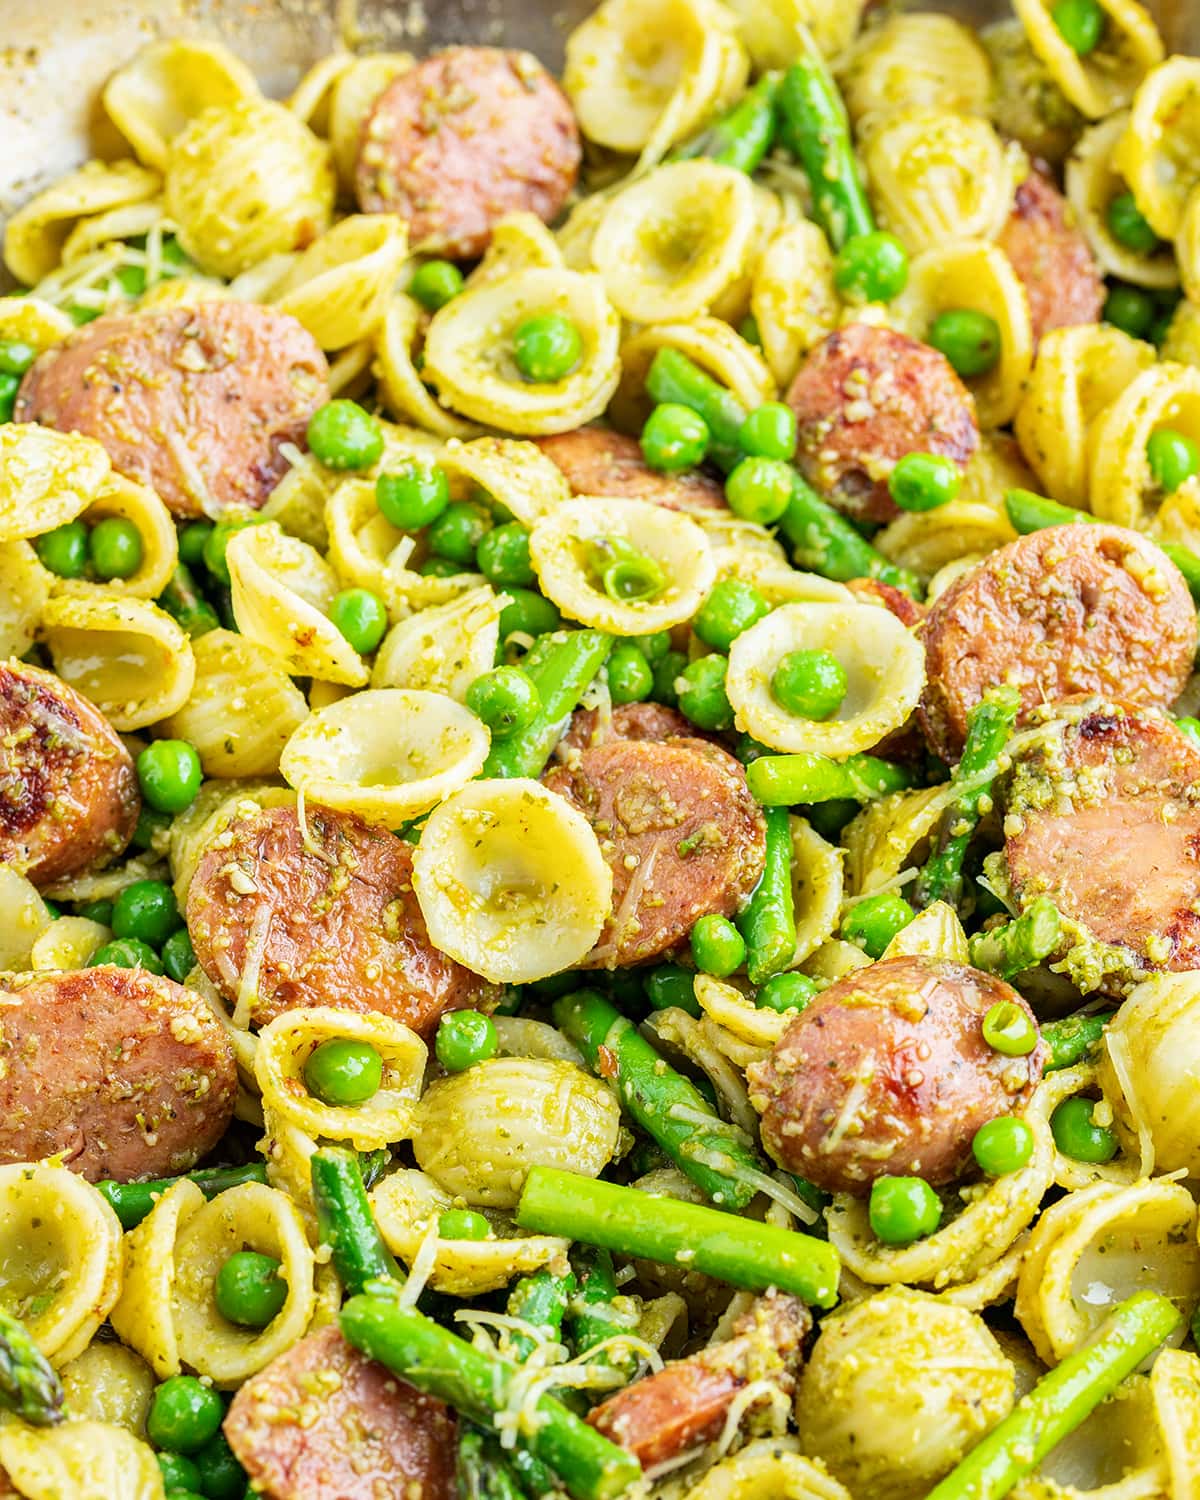 A pan of chicken orecchiette pasta with asparagus and peas.